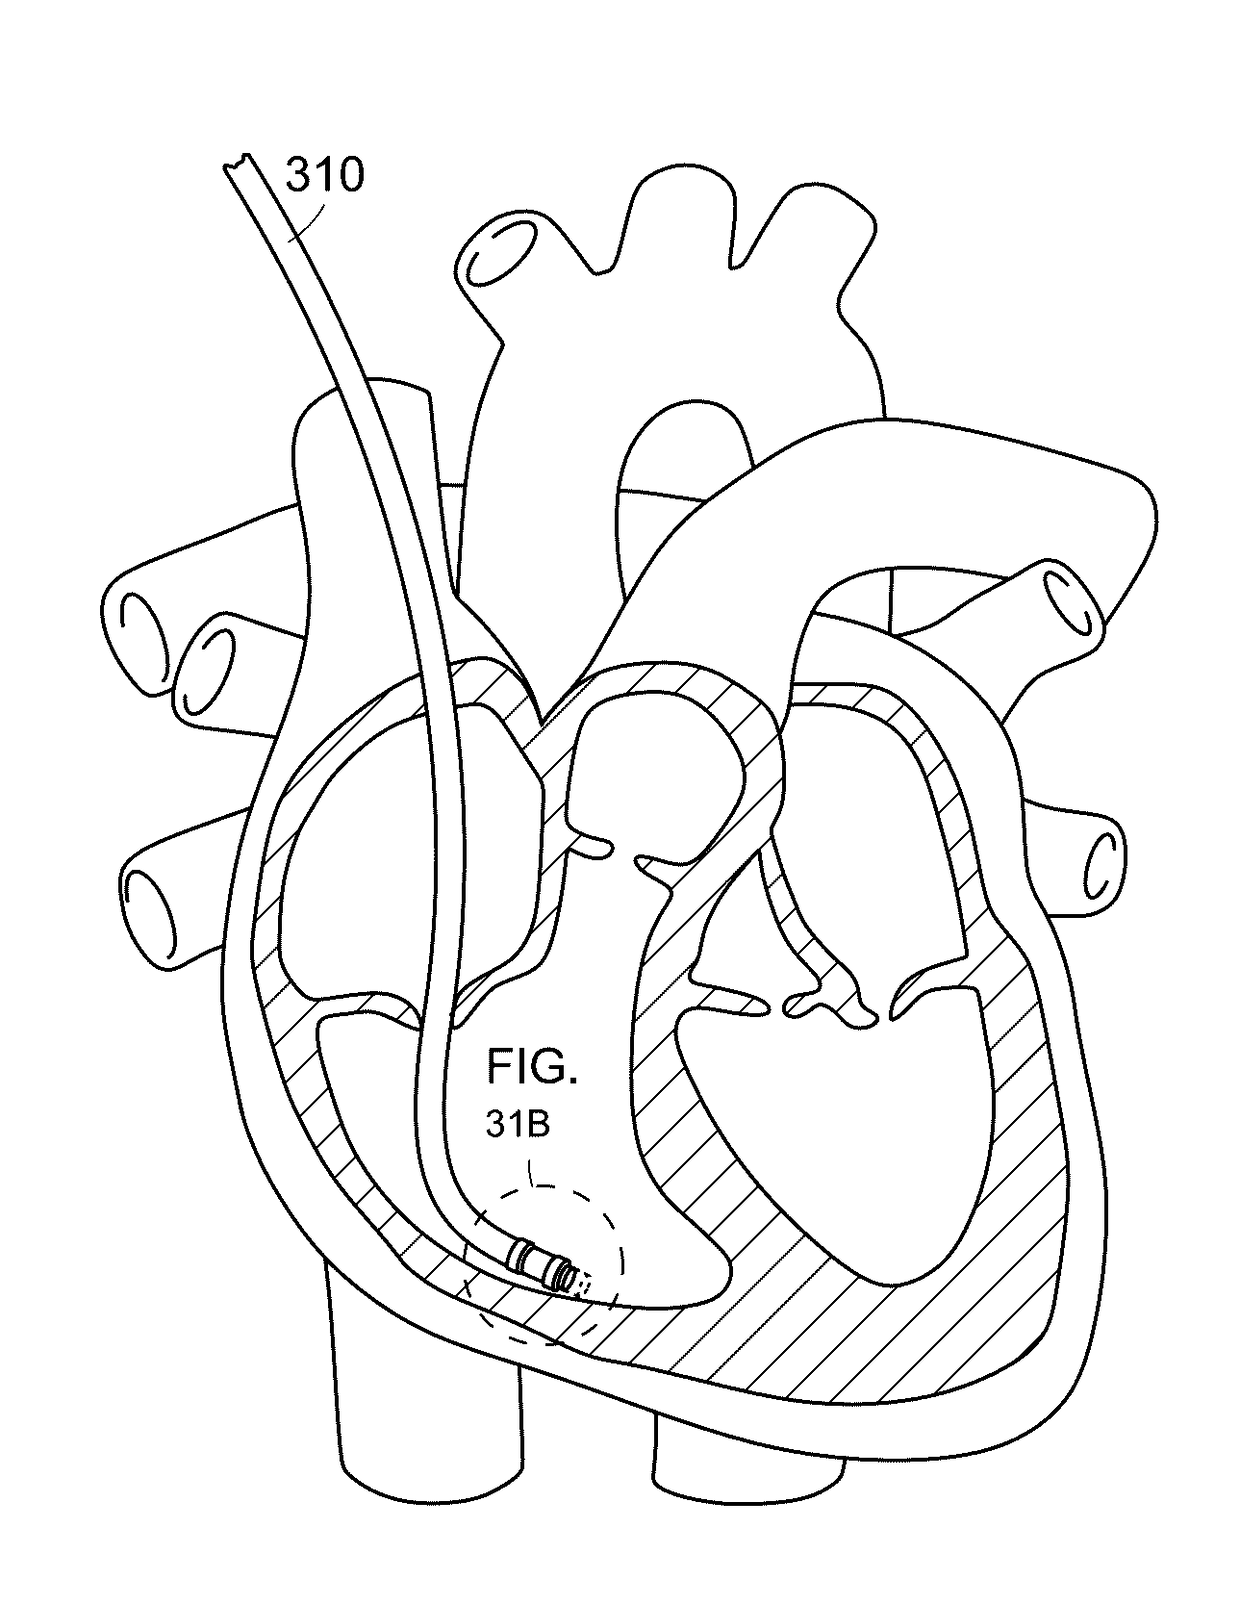 Catheters, systems, and related methods for mapping, minimizing, and treating cardiac fibrillation